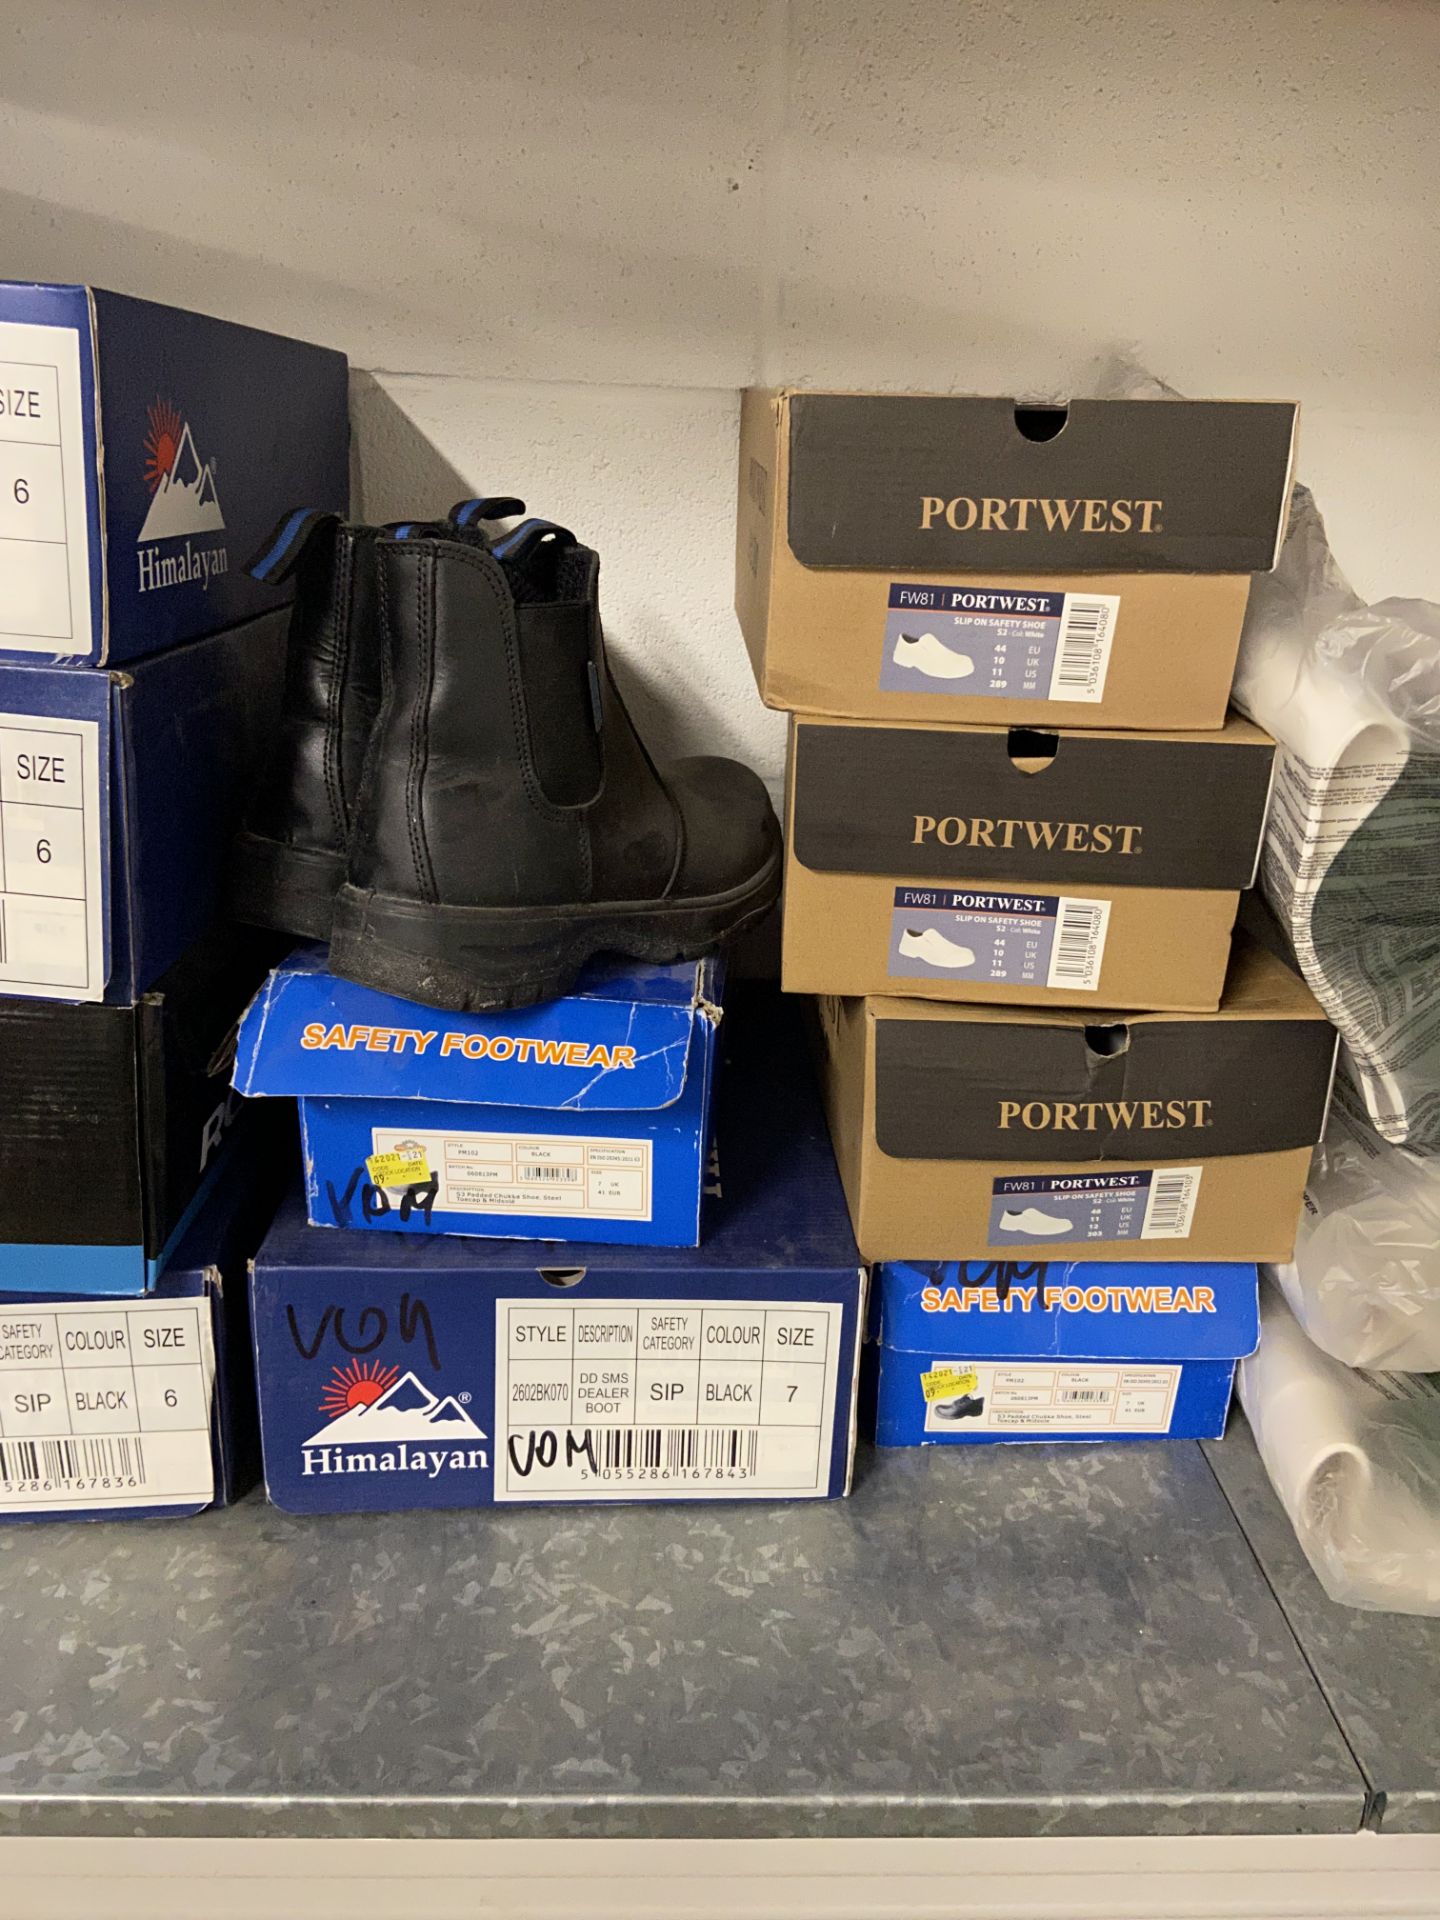 Assorted PPE, including safety footwear and gloves, as set out on rackPlease read the following - Image 2 of 2